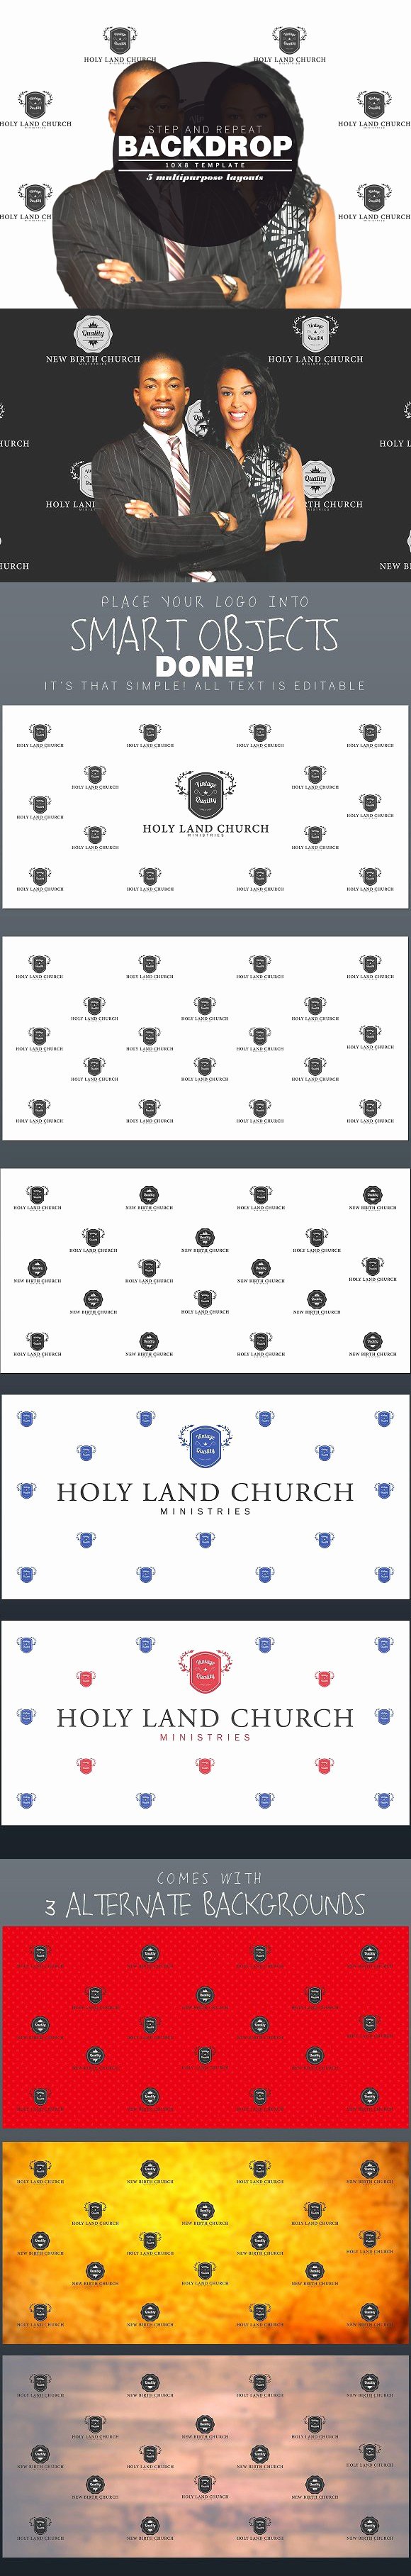 Step and Repeat Backdrop Template Fresh Step and Repeat Backdrop Template Wedding Fonts Wedding Fonts